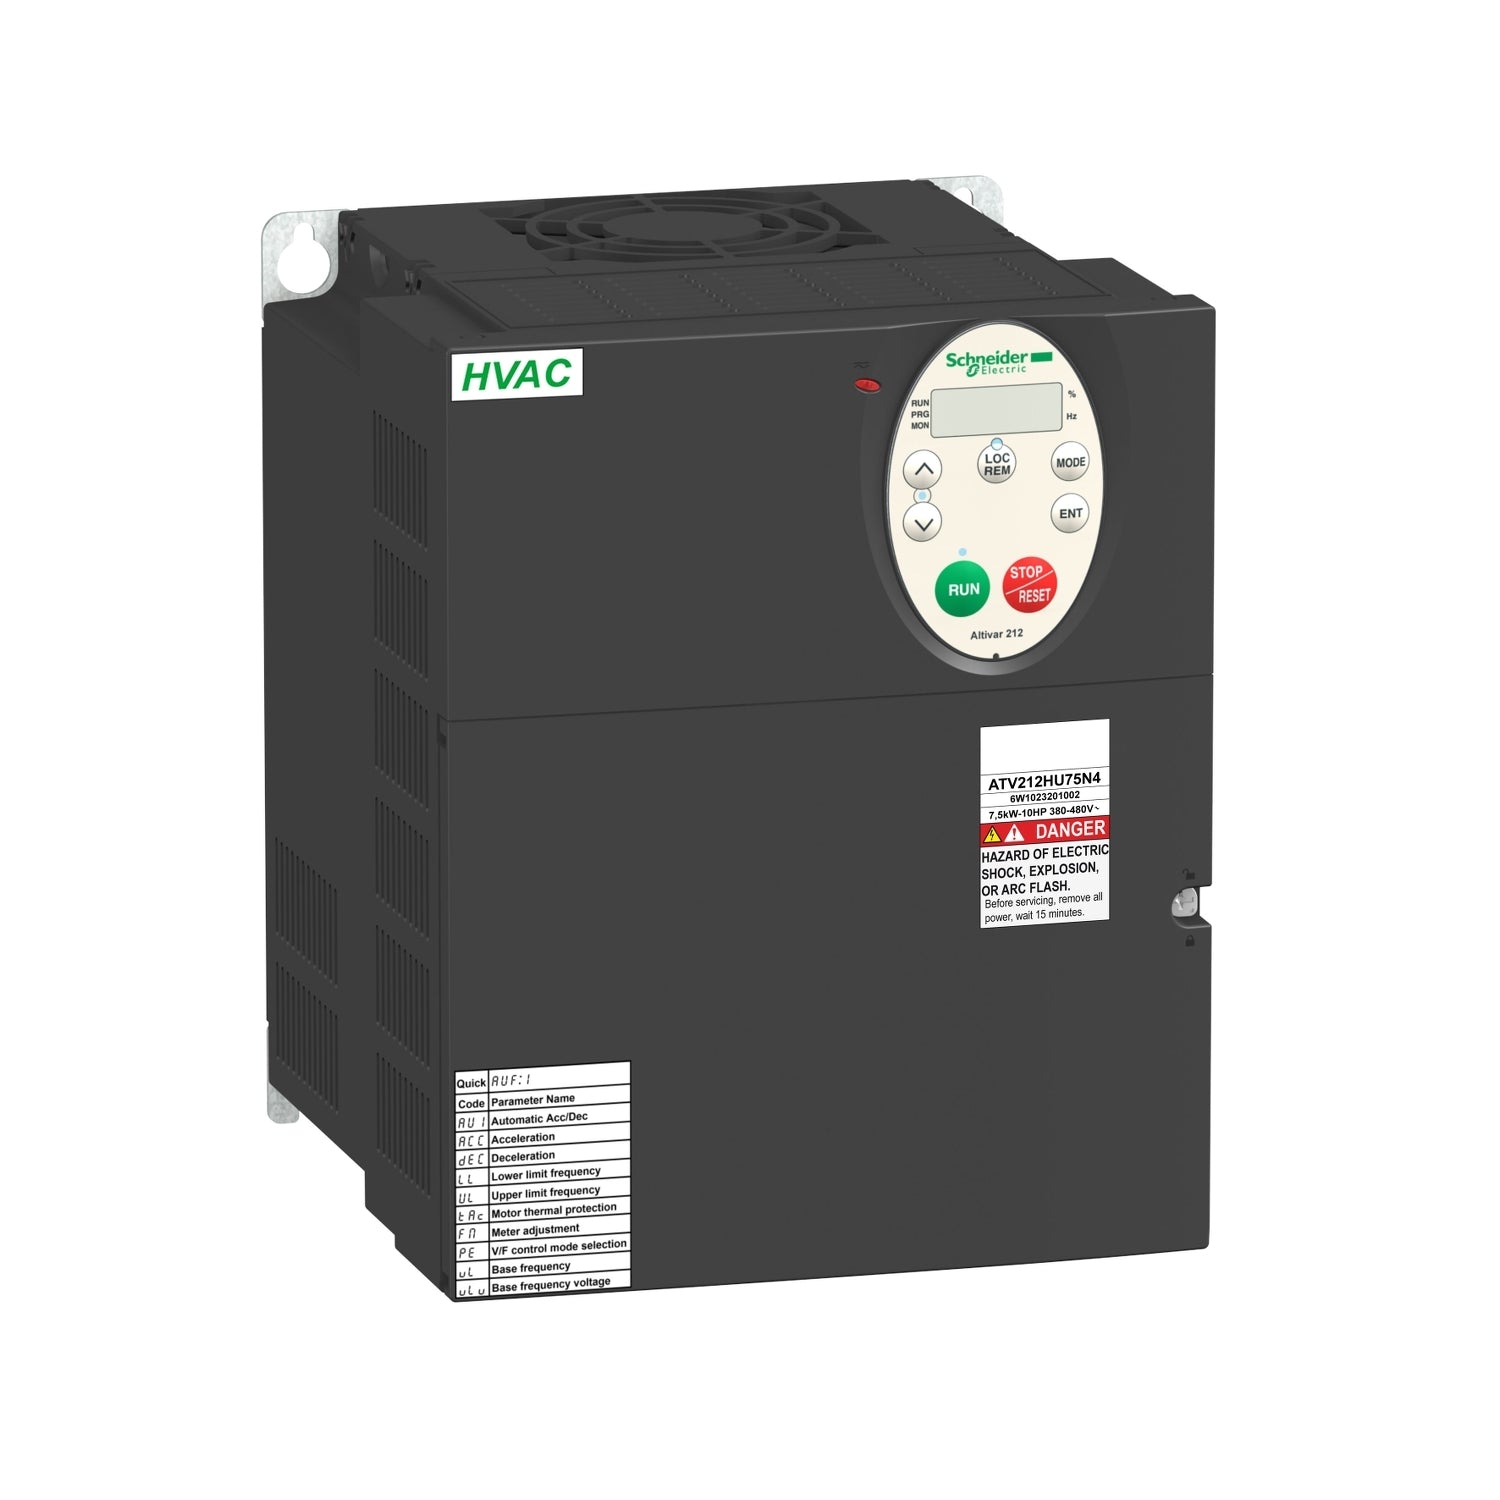 ATV212HD11N4 | Schneider Electric | Variable speed drive, Altivar 212, 11kW, 15hp, 480V, 3 phases, with EMC, IP21